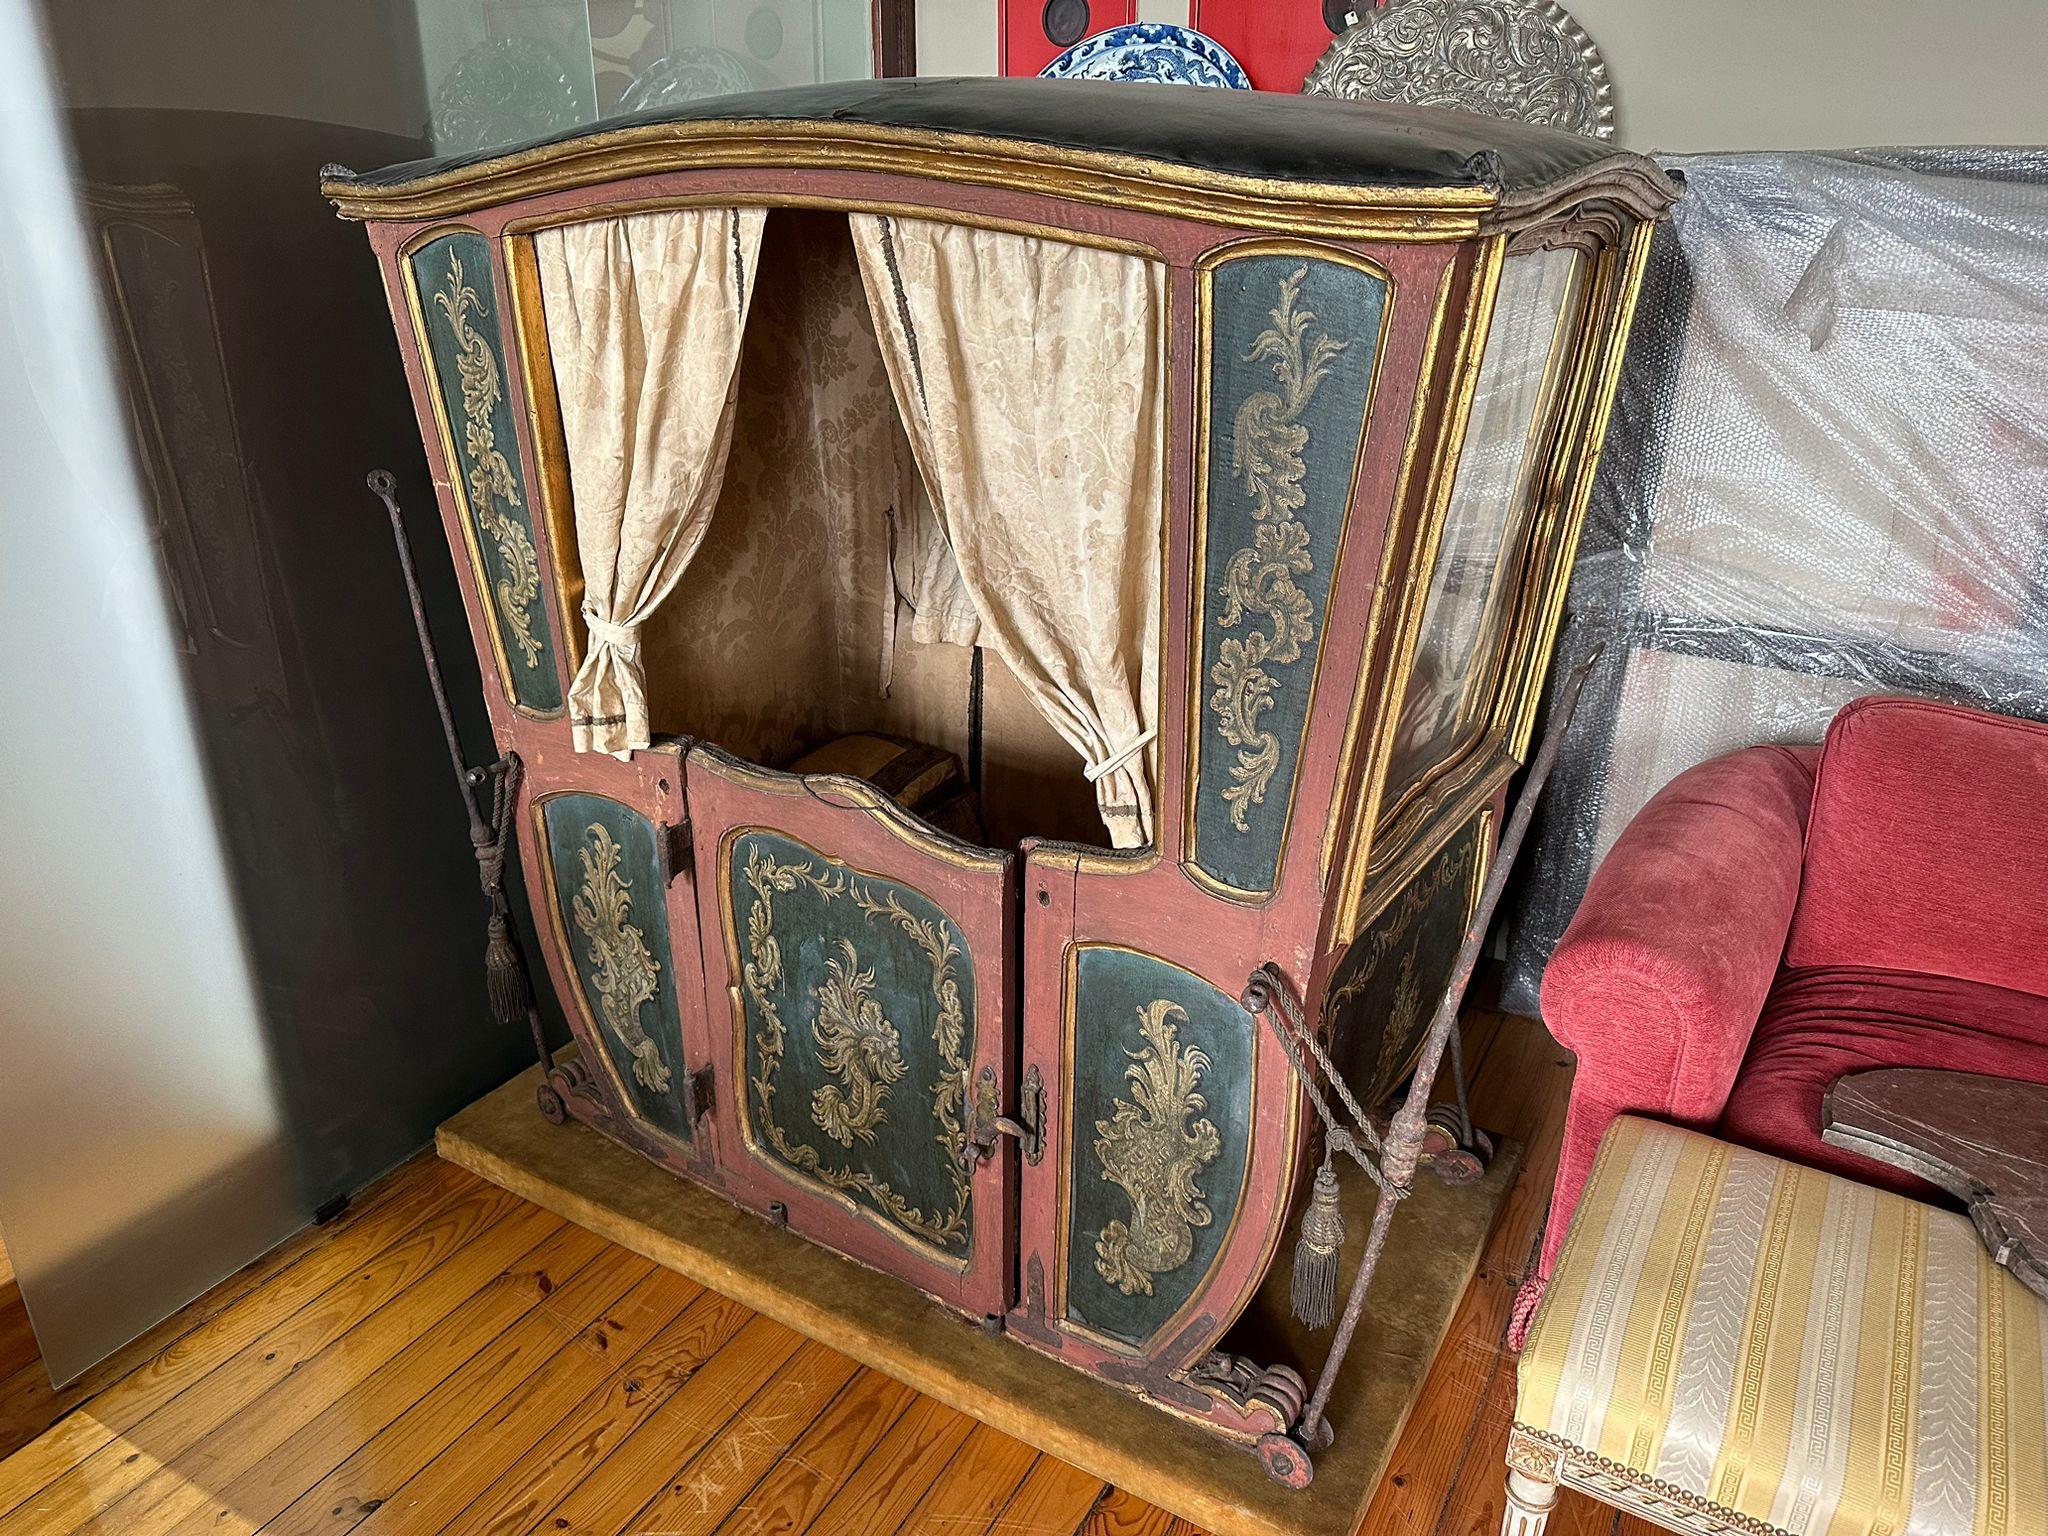 Hand-Crafted Rare Portuguese Sedan Chair 18th Century For Sale